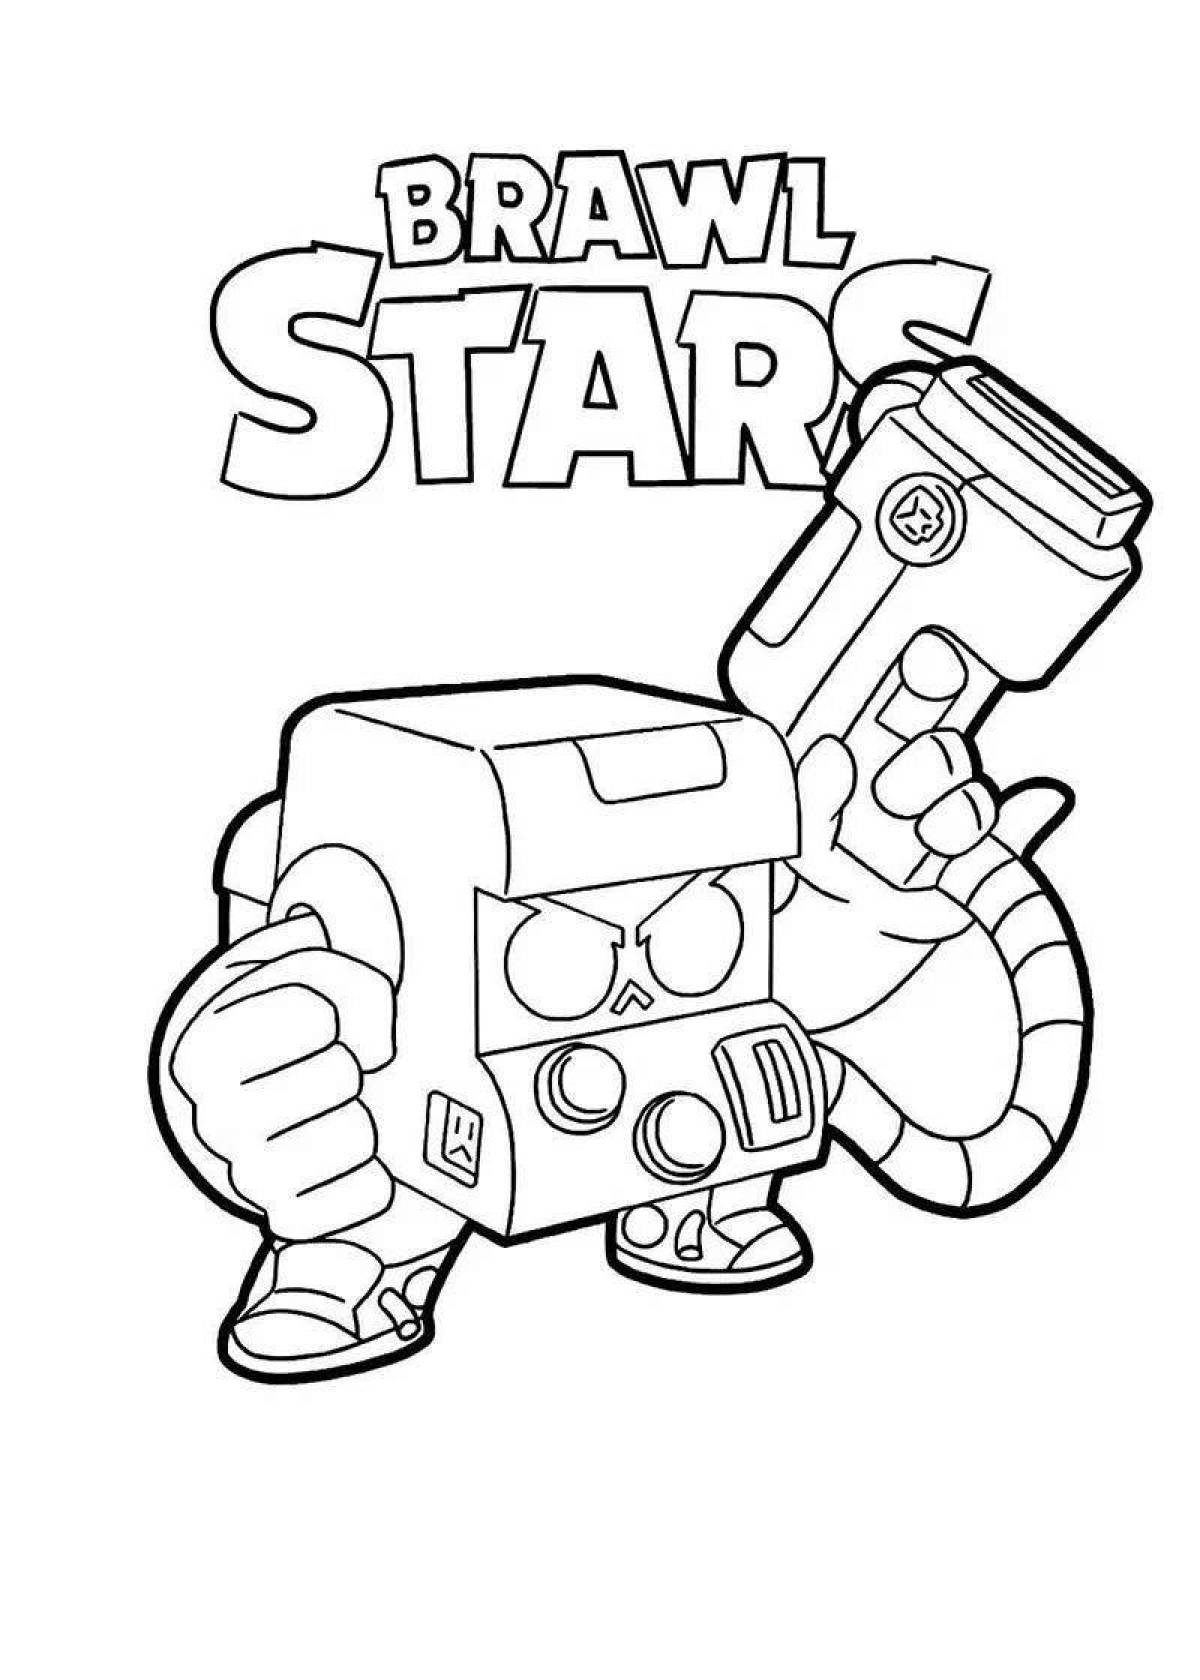 Gus adorable from brawl stars